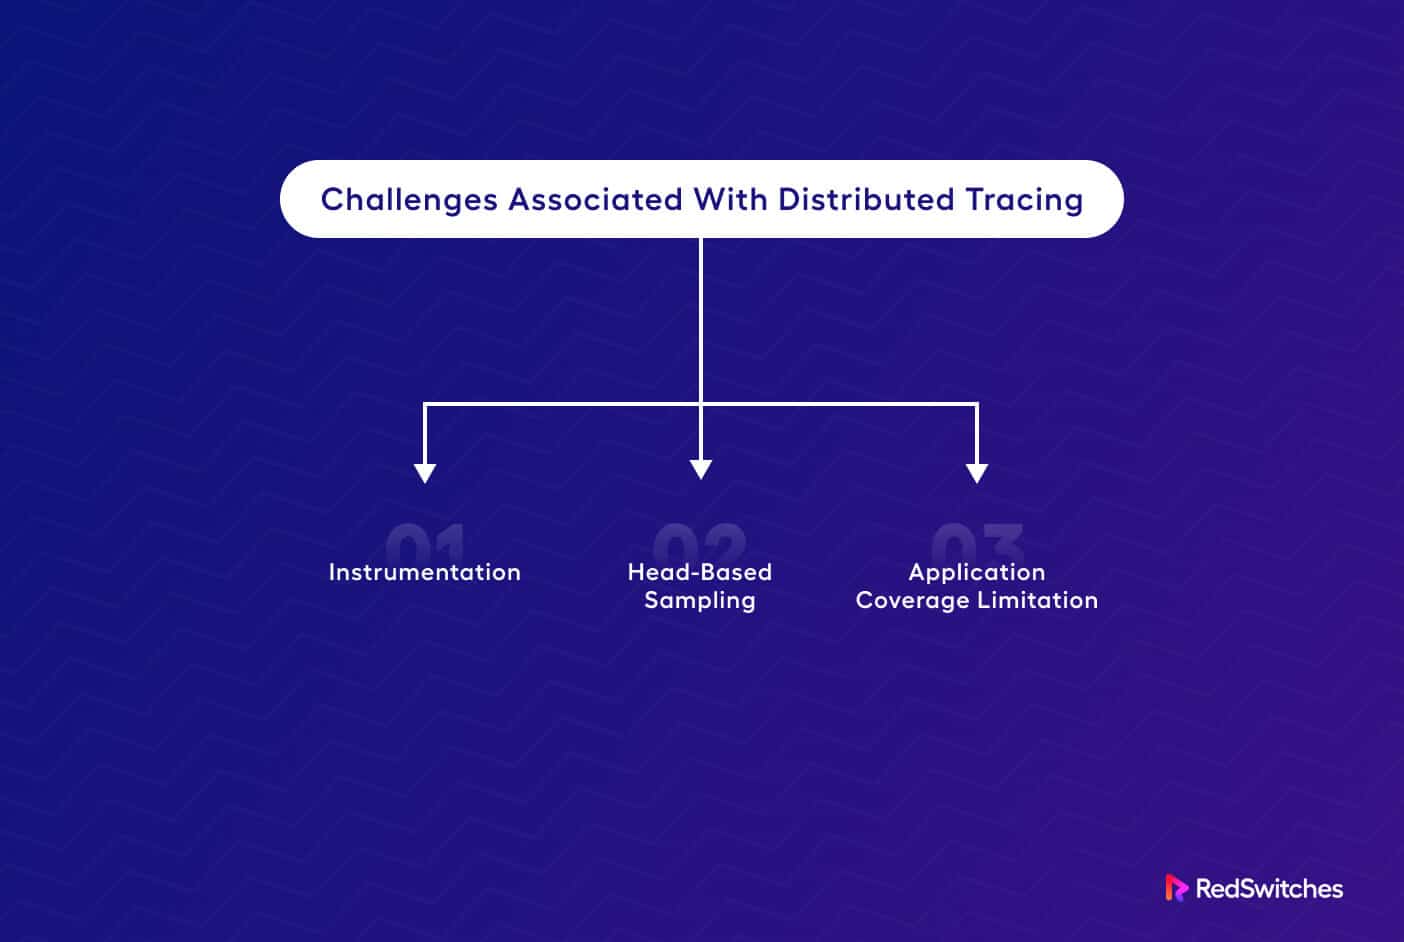 Challenges facing with distributed tracing